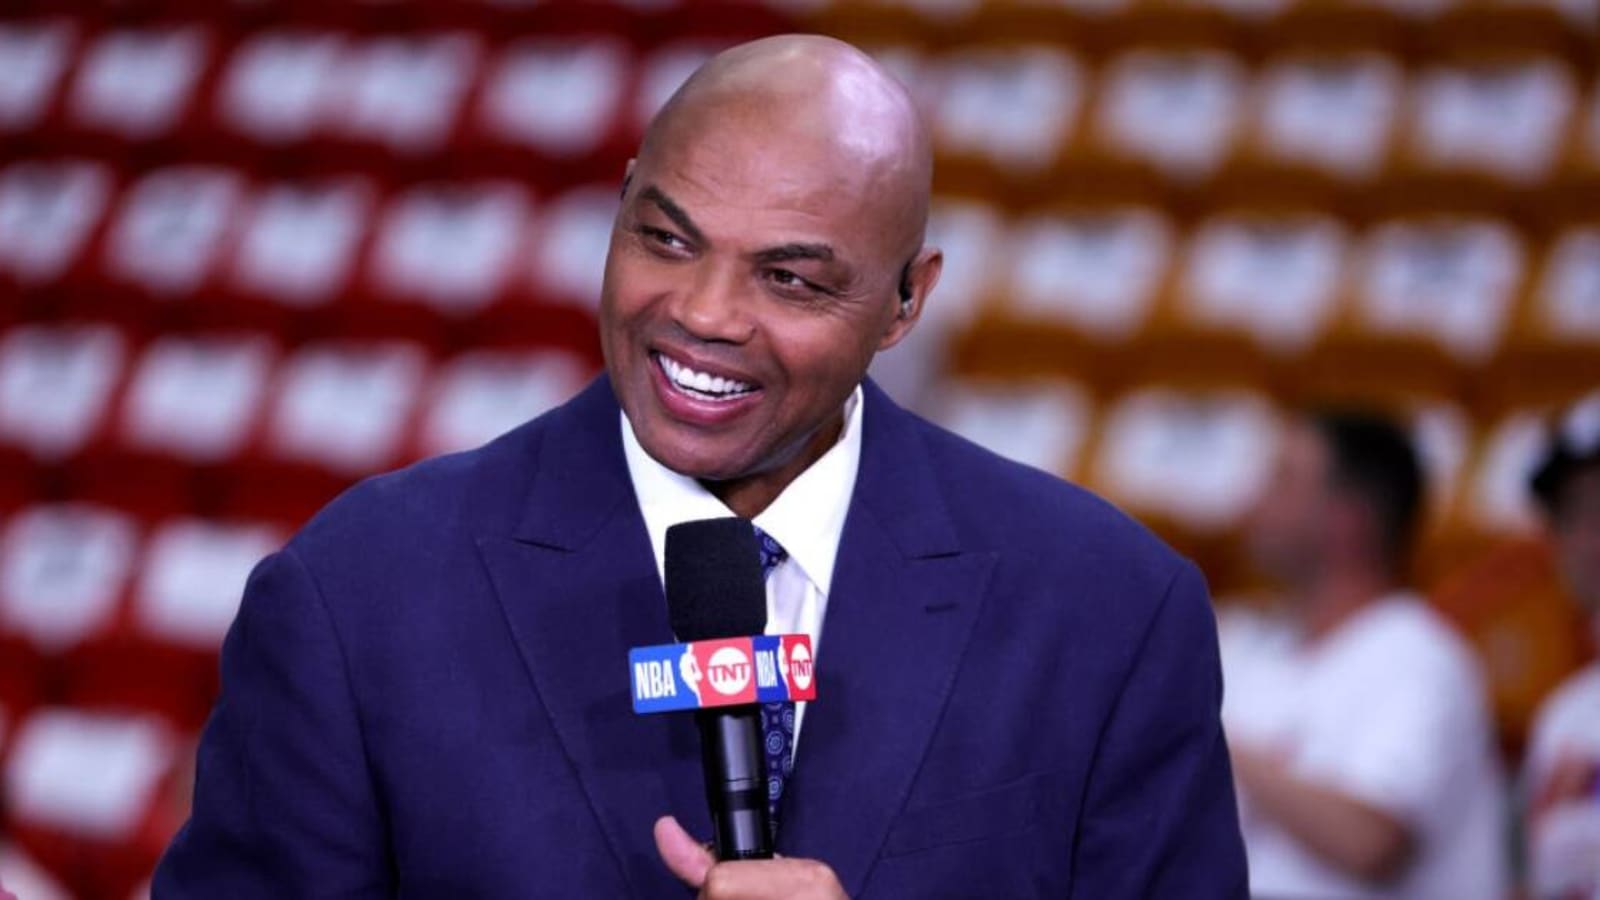 Charles Barkley predicts Deion Sanders will one day win a national championship